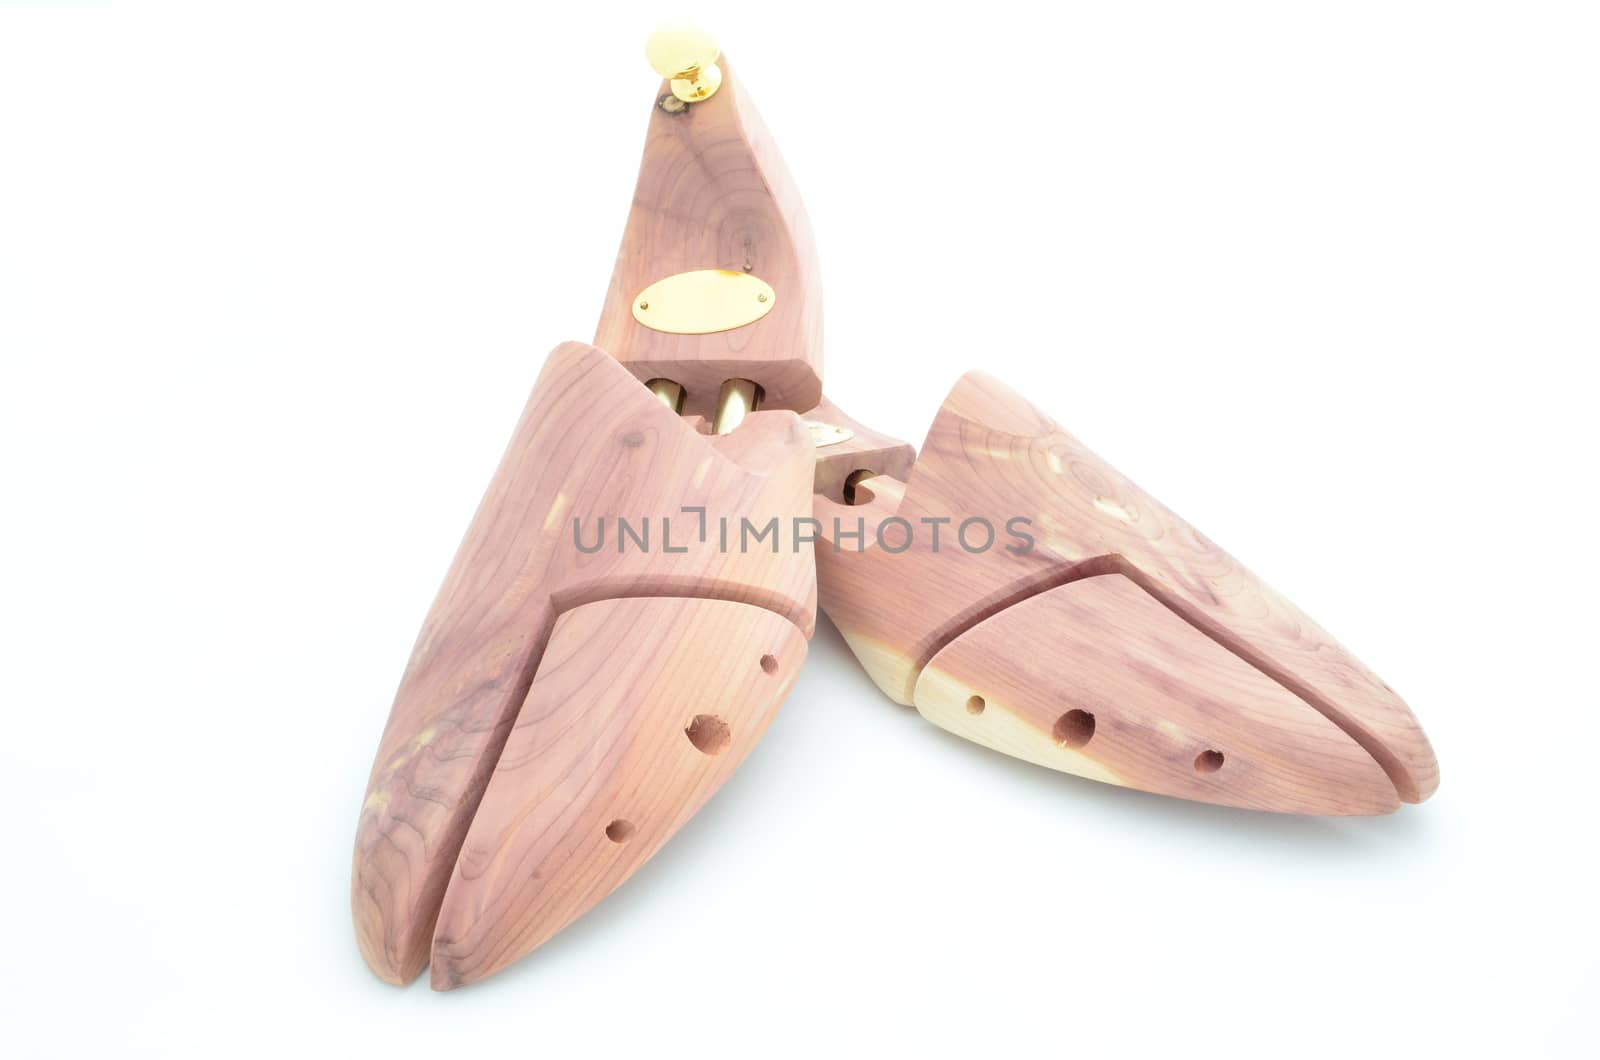 A pair of cedar wood shoe trees. These are luxury fashion accessories for men to keep the shoes in good shape.